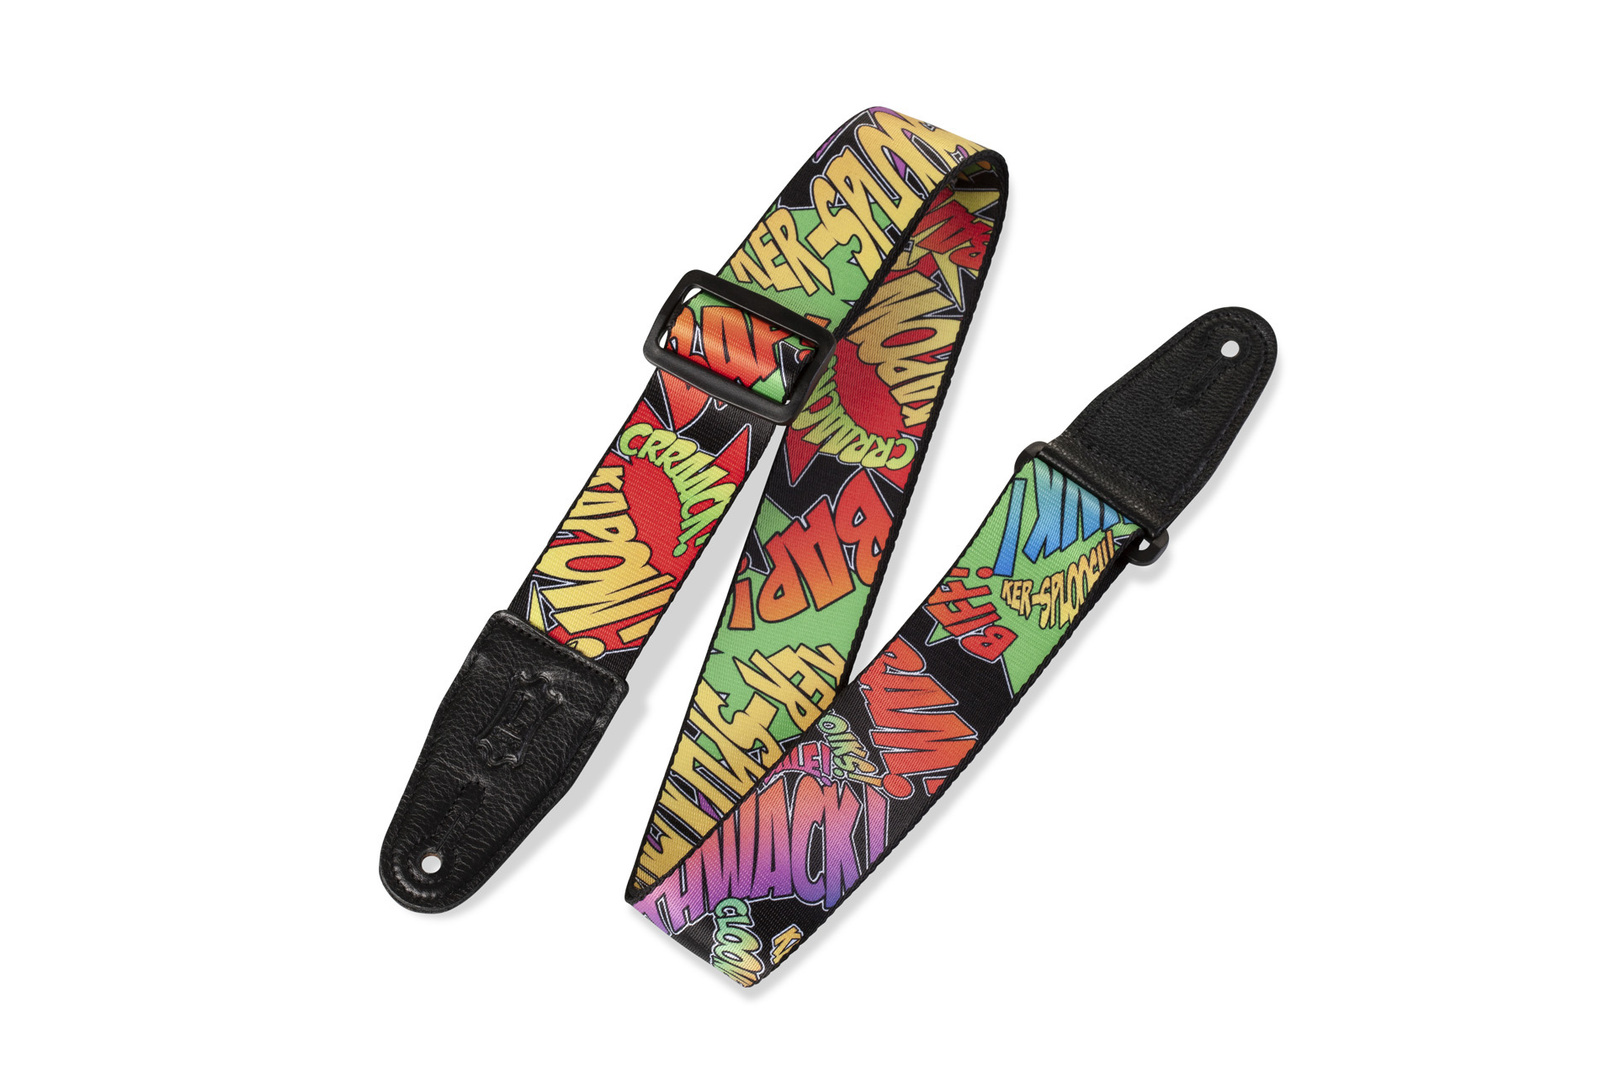 LEVY'S Polyester Comic Book Onomatopoeia Motif Guitar Strap 2" Wide